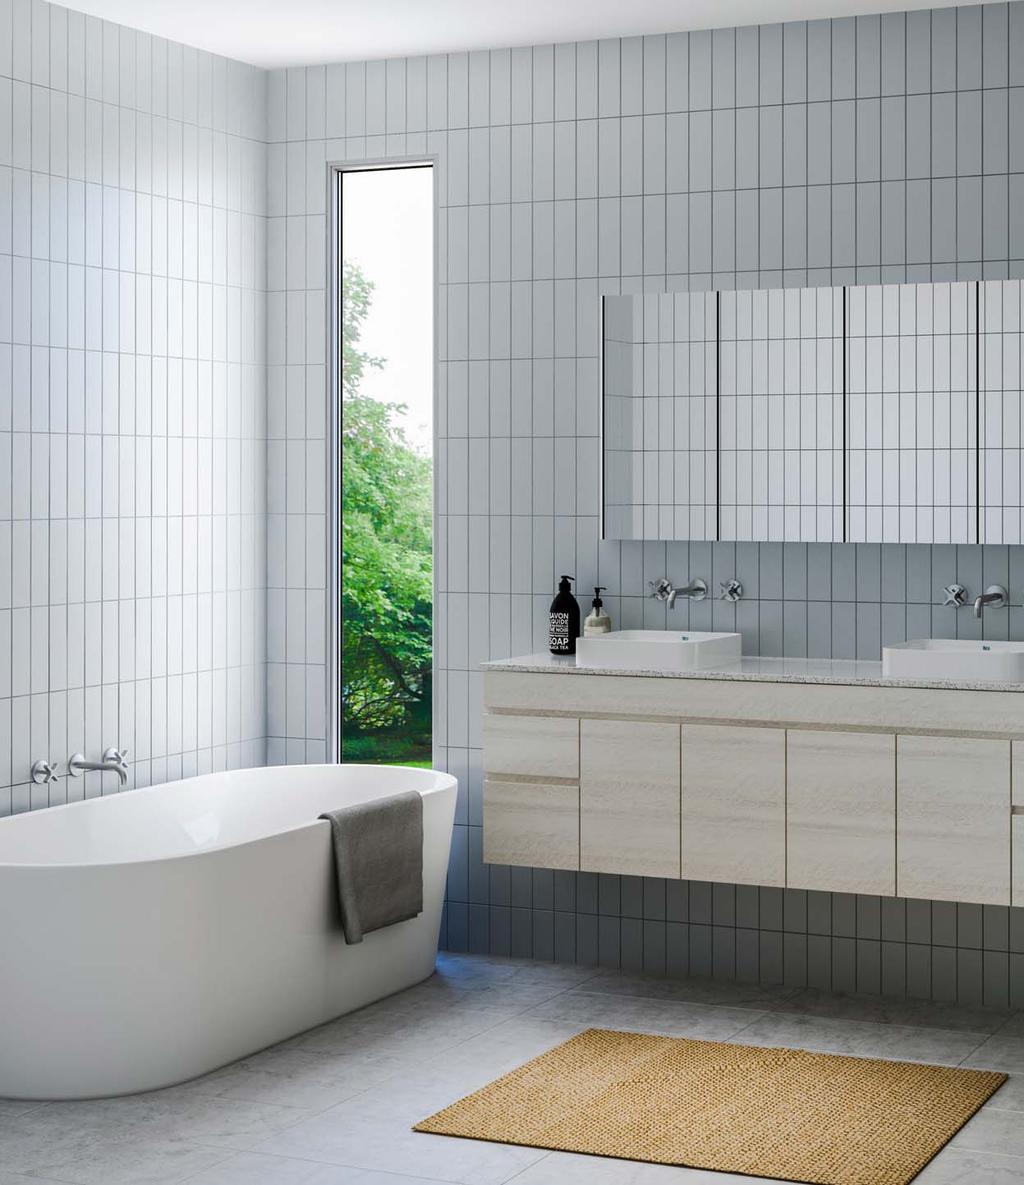 Bathroom Happiness TM Visit any one of our 300 showrooms around Australia for all the latest products, concepts and inspiration to make your bathroom whatever you want it to be.